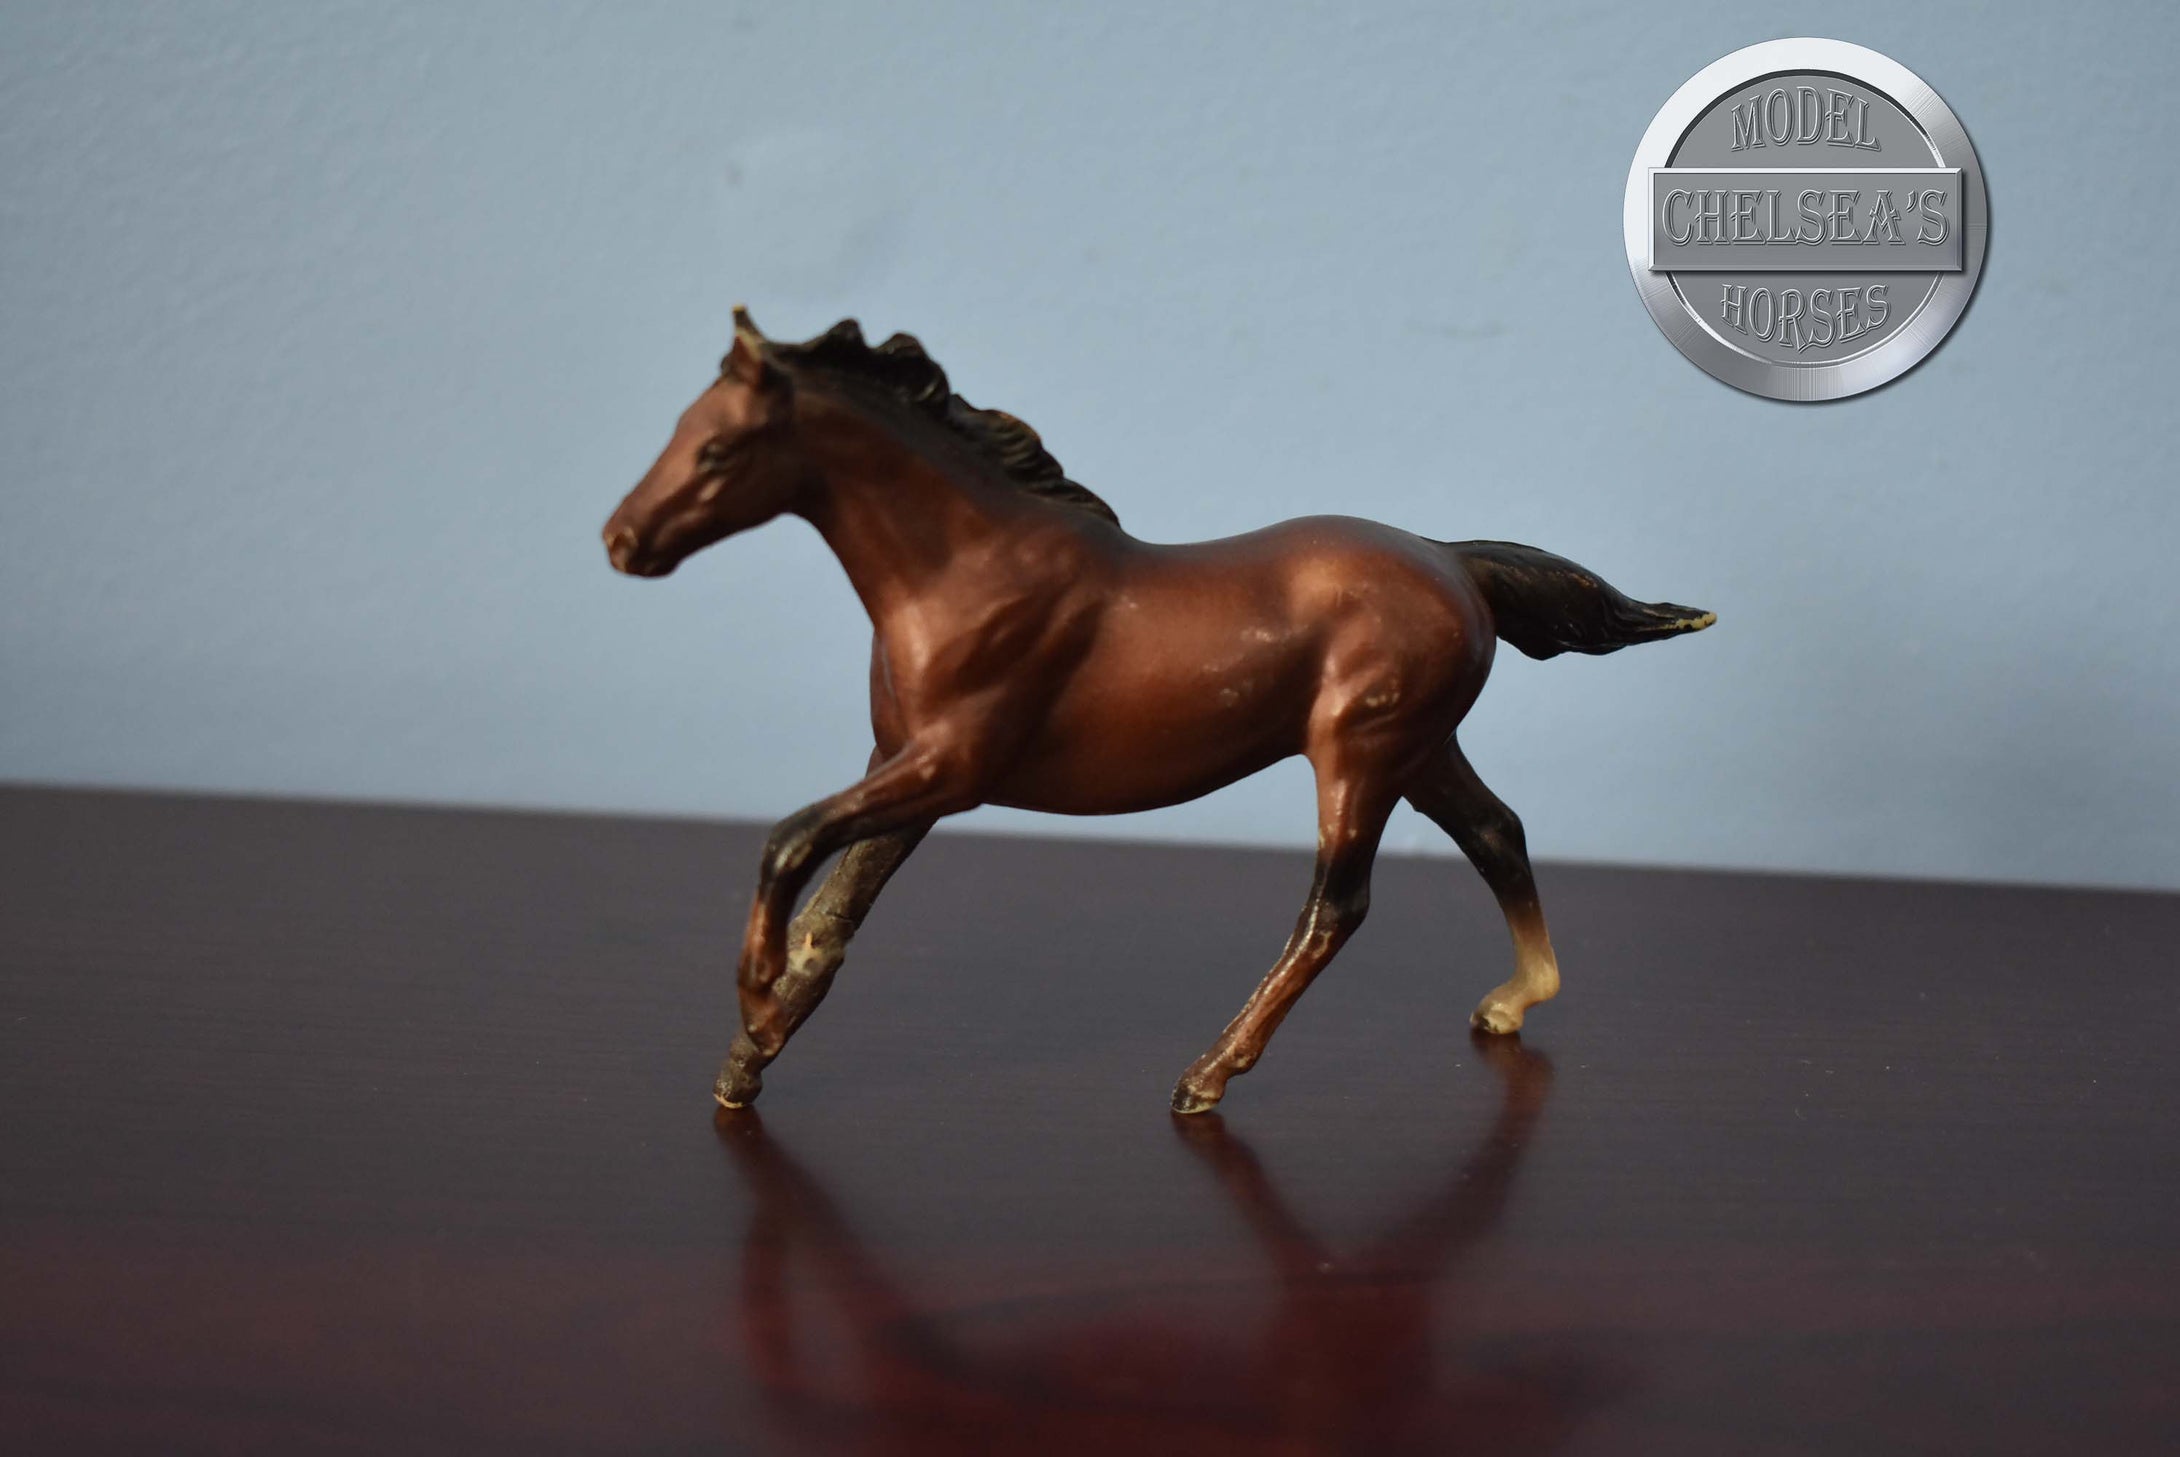 BODY 12 Piece Stablemate Set Seabiscuit Only-Seabiscuit Mold-JC Penney Holiday Catalog-Breyer Stablemate